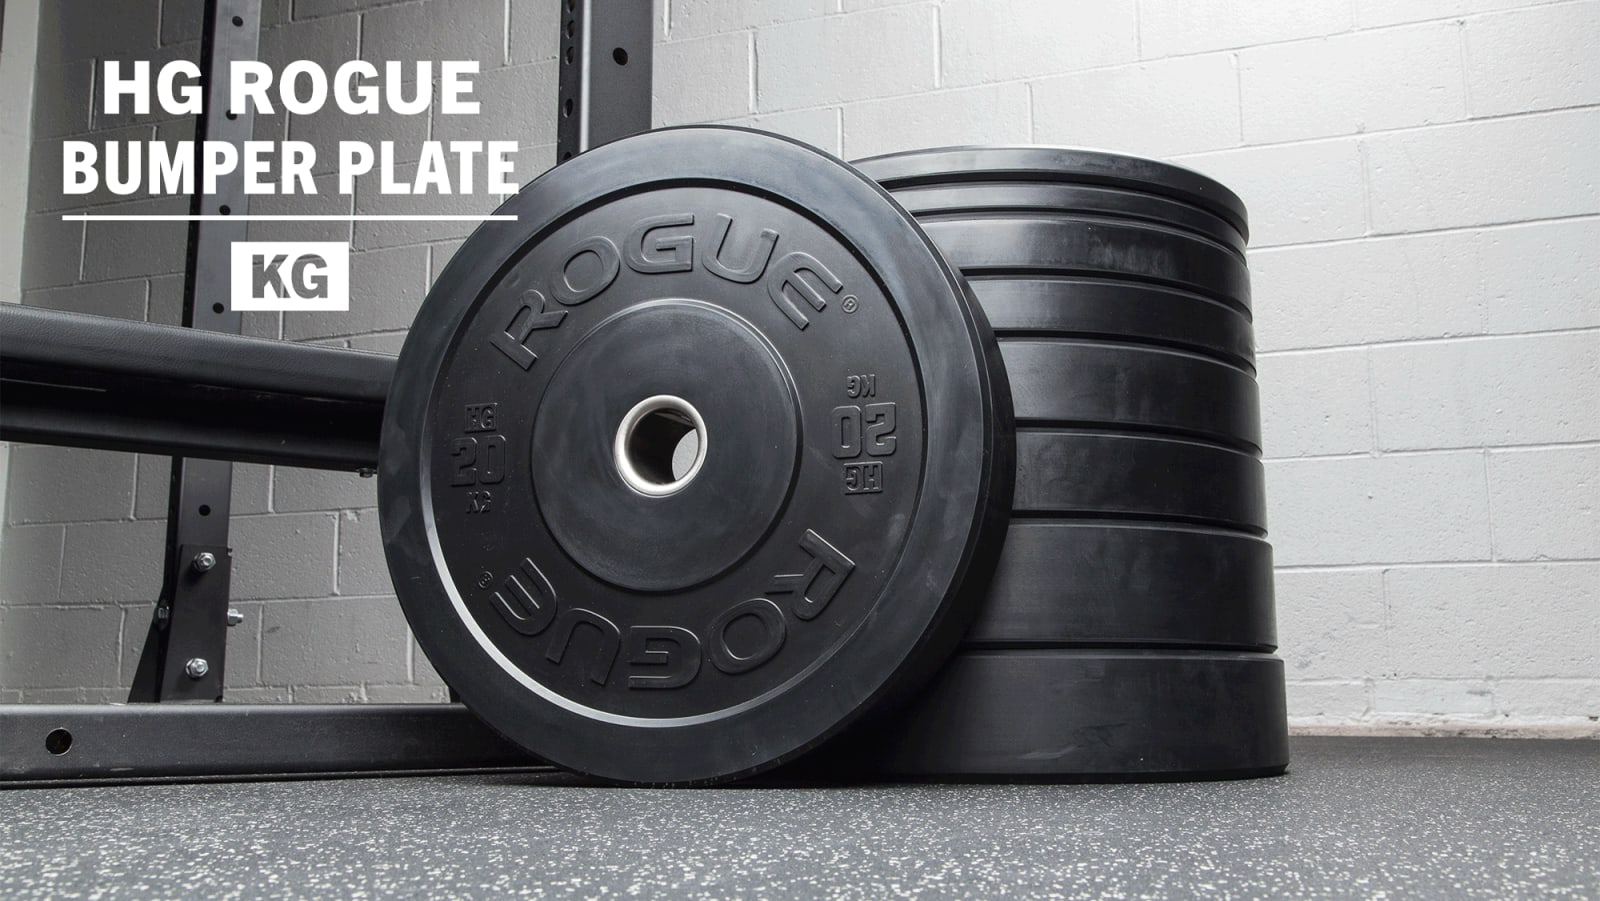 KG Rogue Bumpers - Dead Bounce Bumper Plates - Weightlifting 